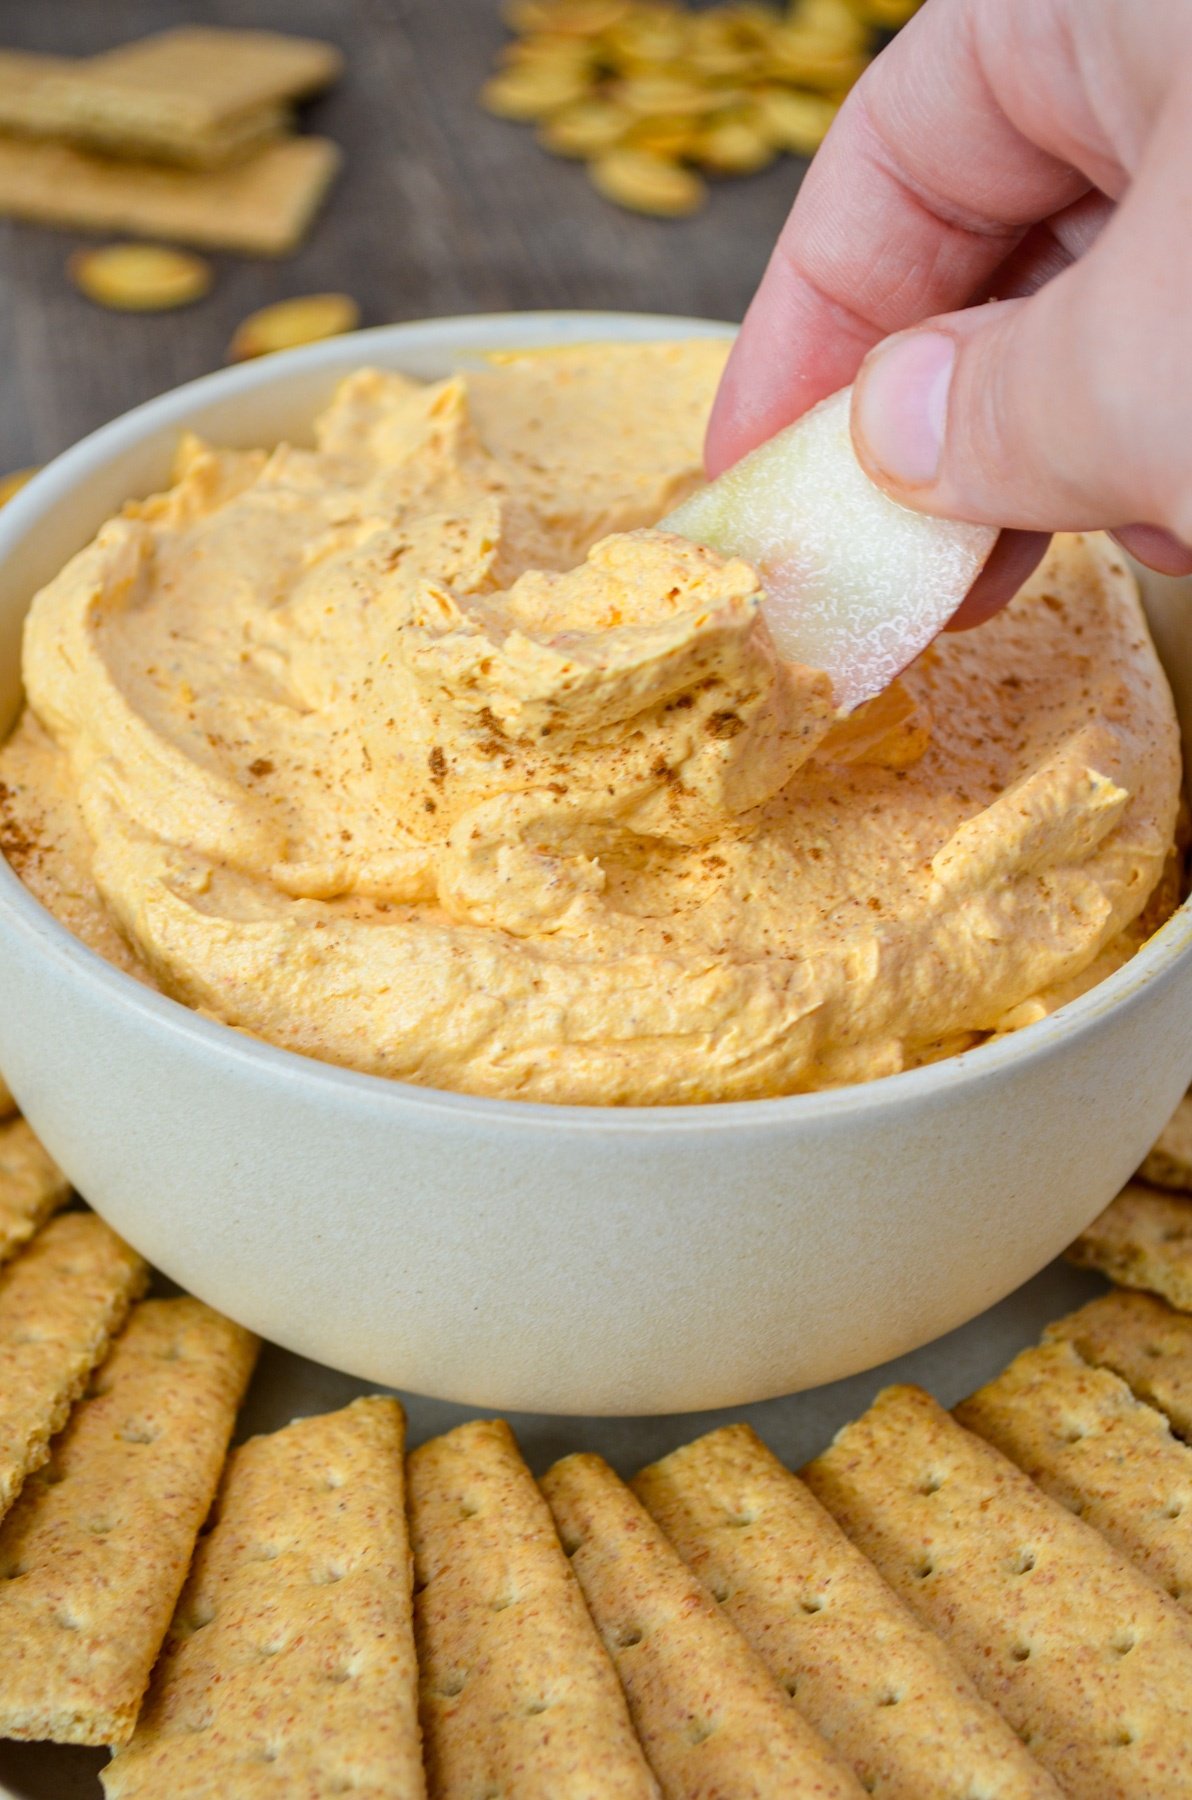 A bowl of pumpkin fluff dip, surrounded by graham crackers. A hand dips an apple slice into the orange colored dip.